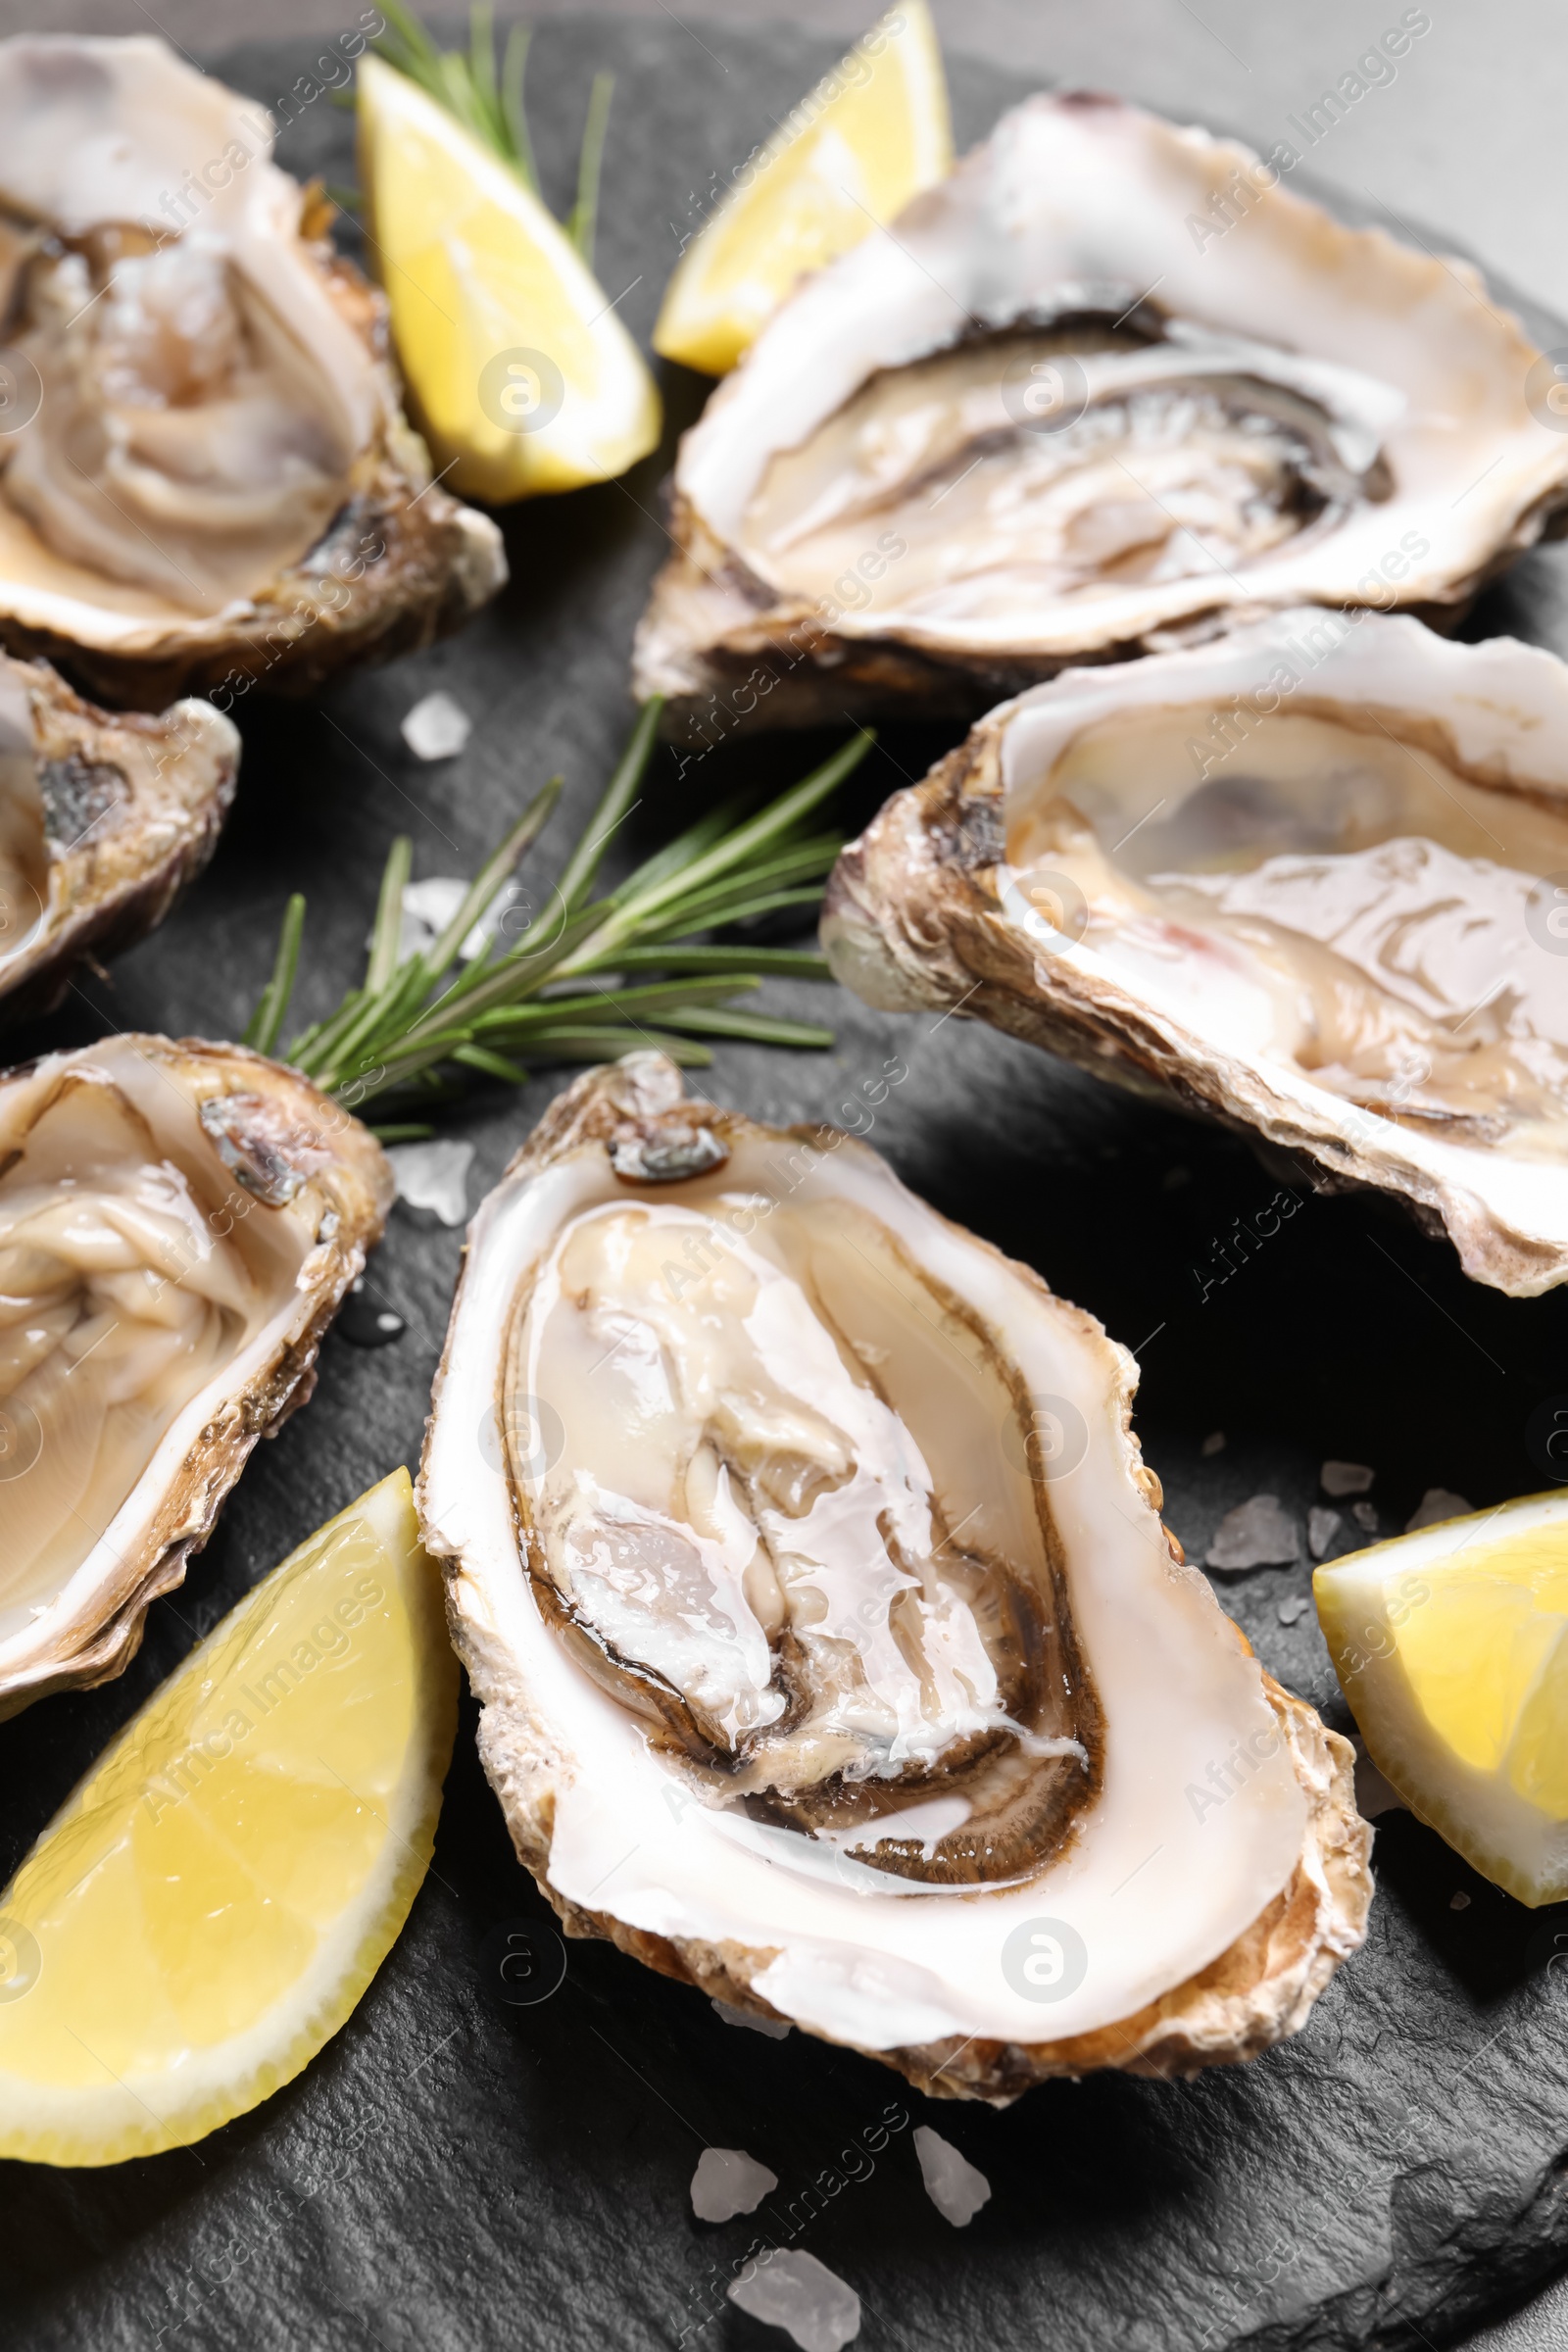 Photo of Delicious fresh oysters with lemon slices served on table